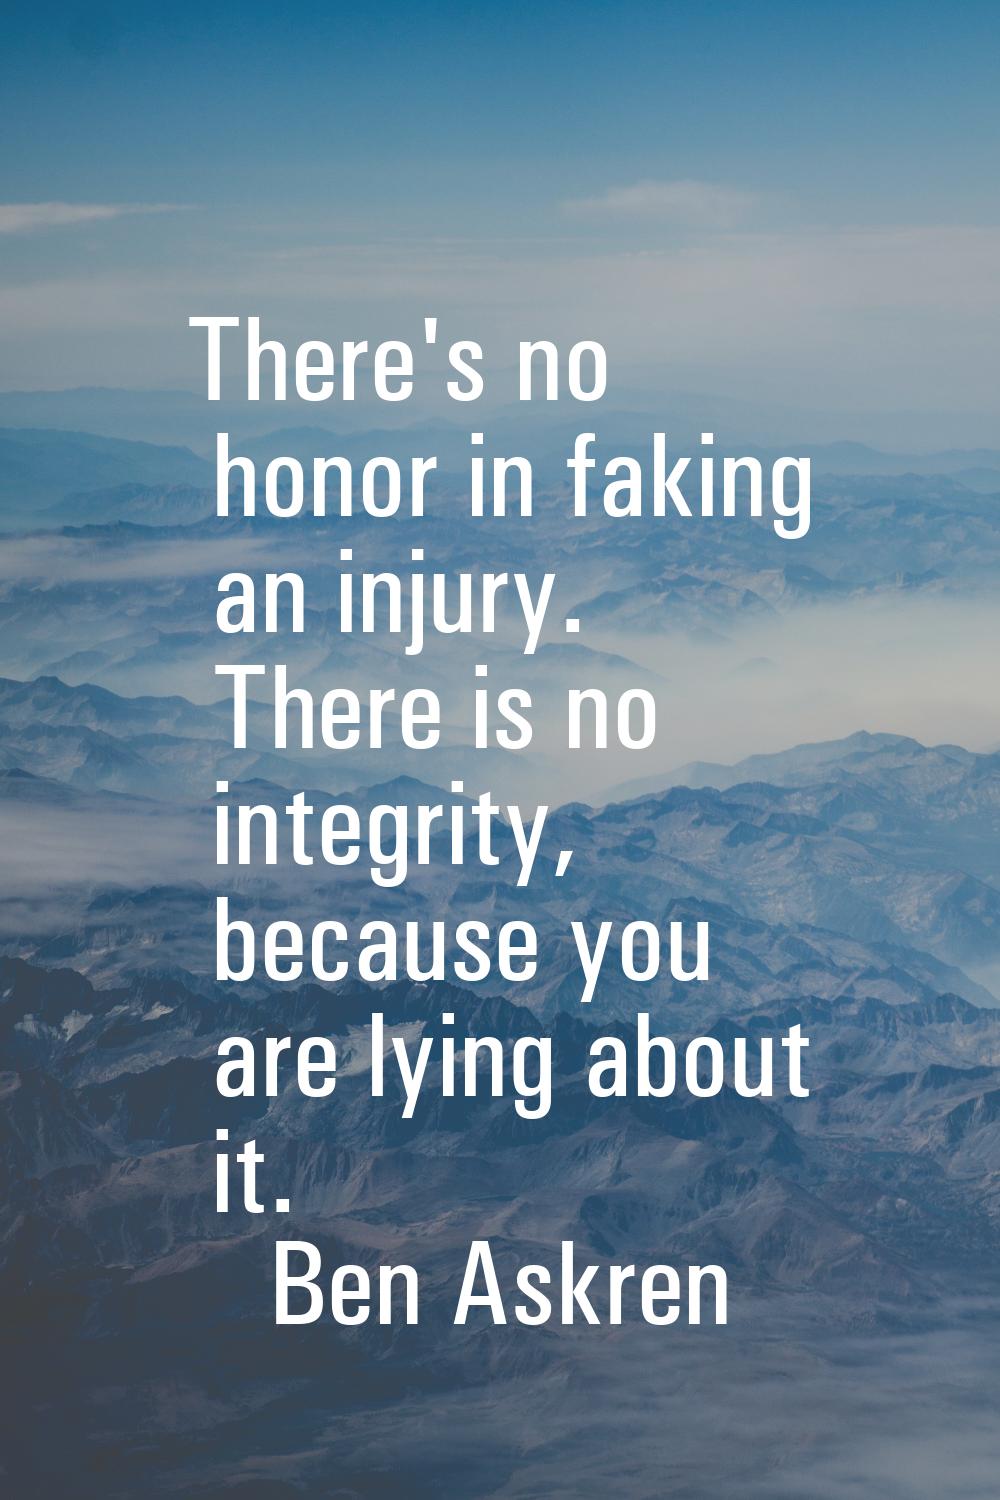 There's no honor in faking an injury. There is no integrity, because you are lying about it.